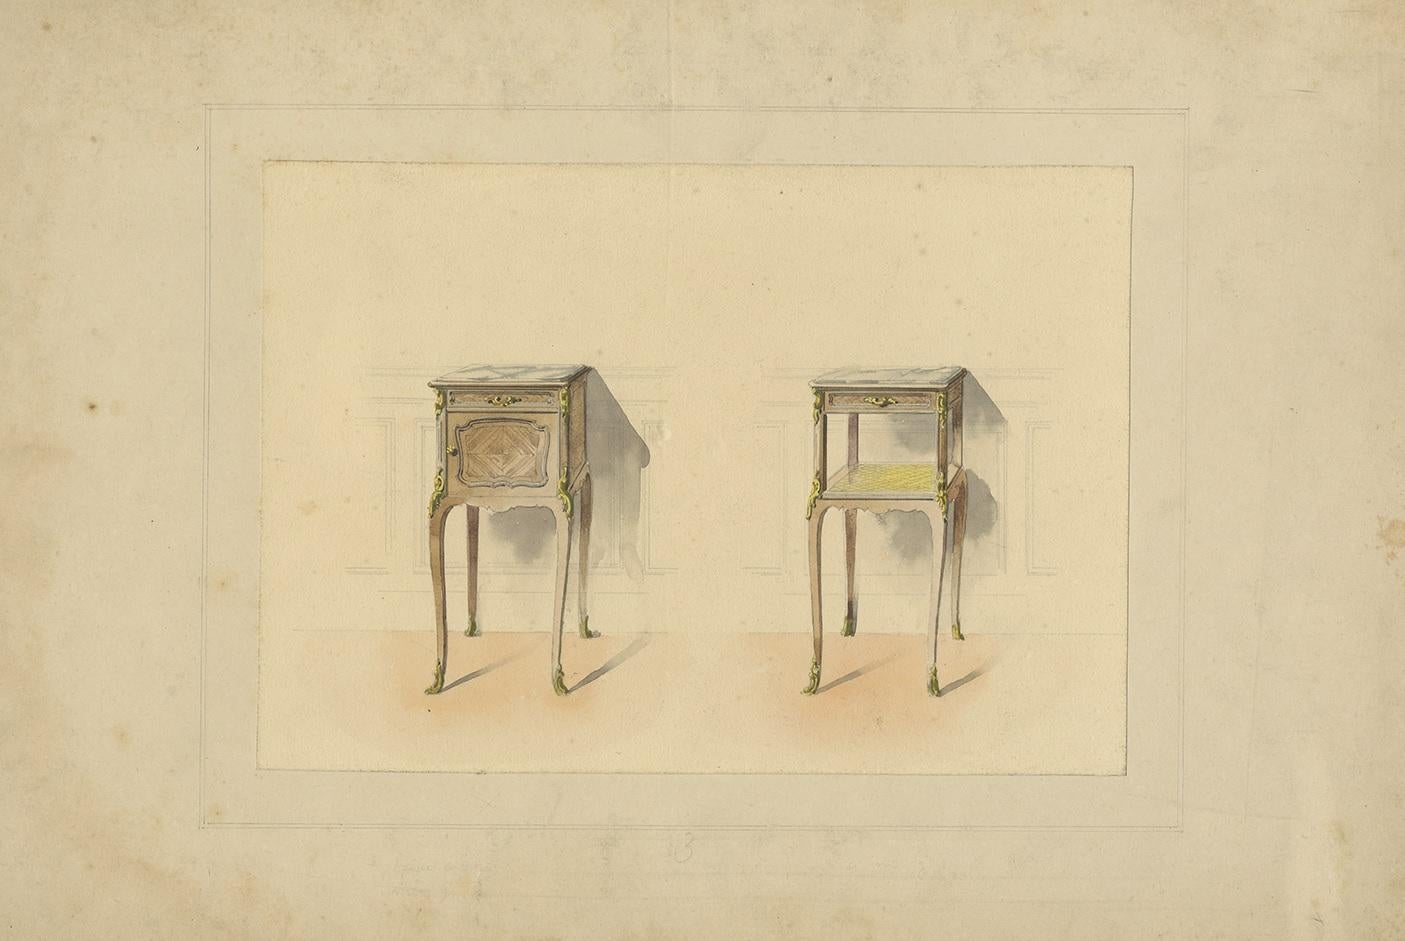 Antique print of the design of two sidetables/furniture. The print is hand colored, the handwritten notes below the print are erased. Trimmed and mounted to board.